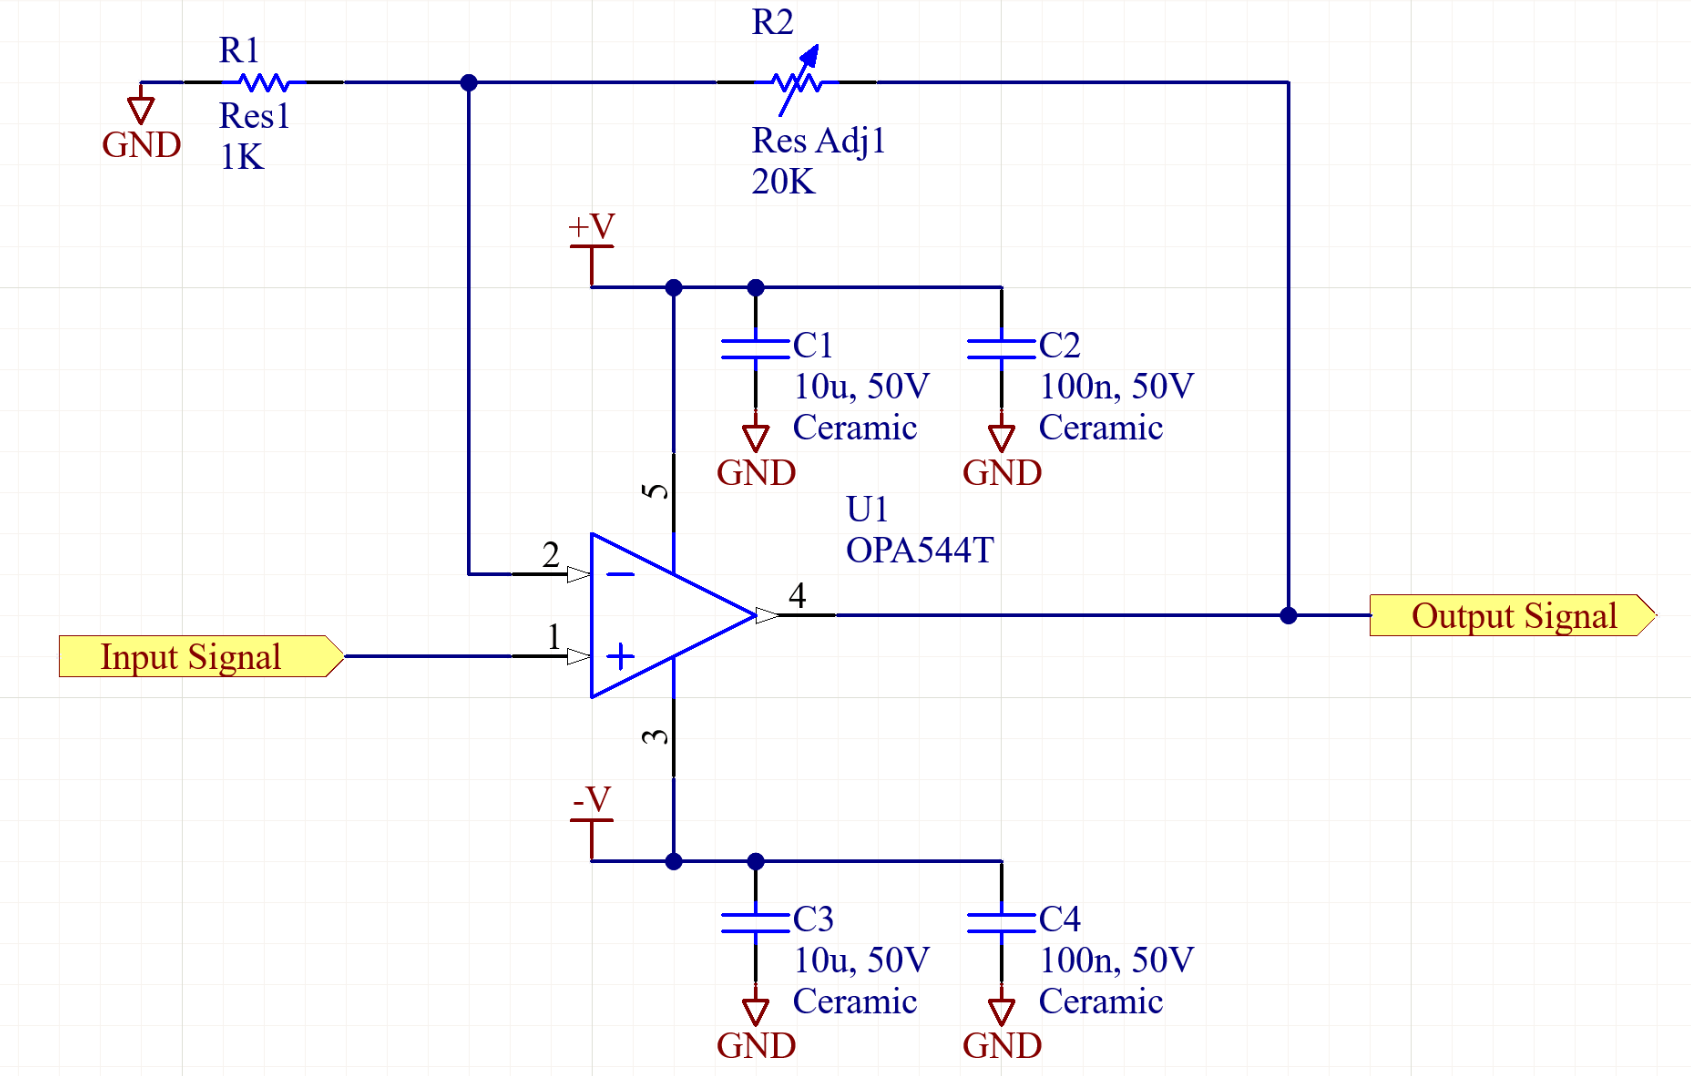 Figure 1: Basic inverting amplifier with OPA544.